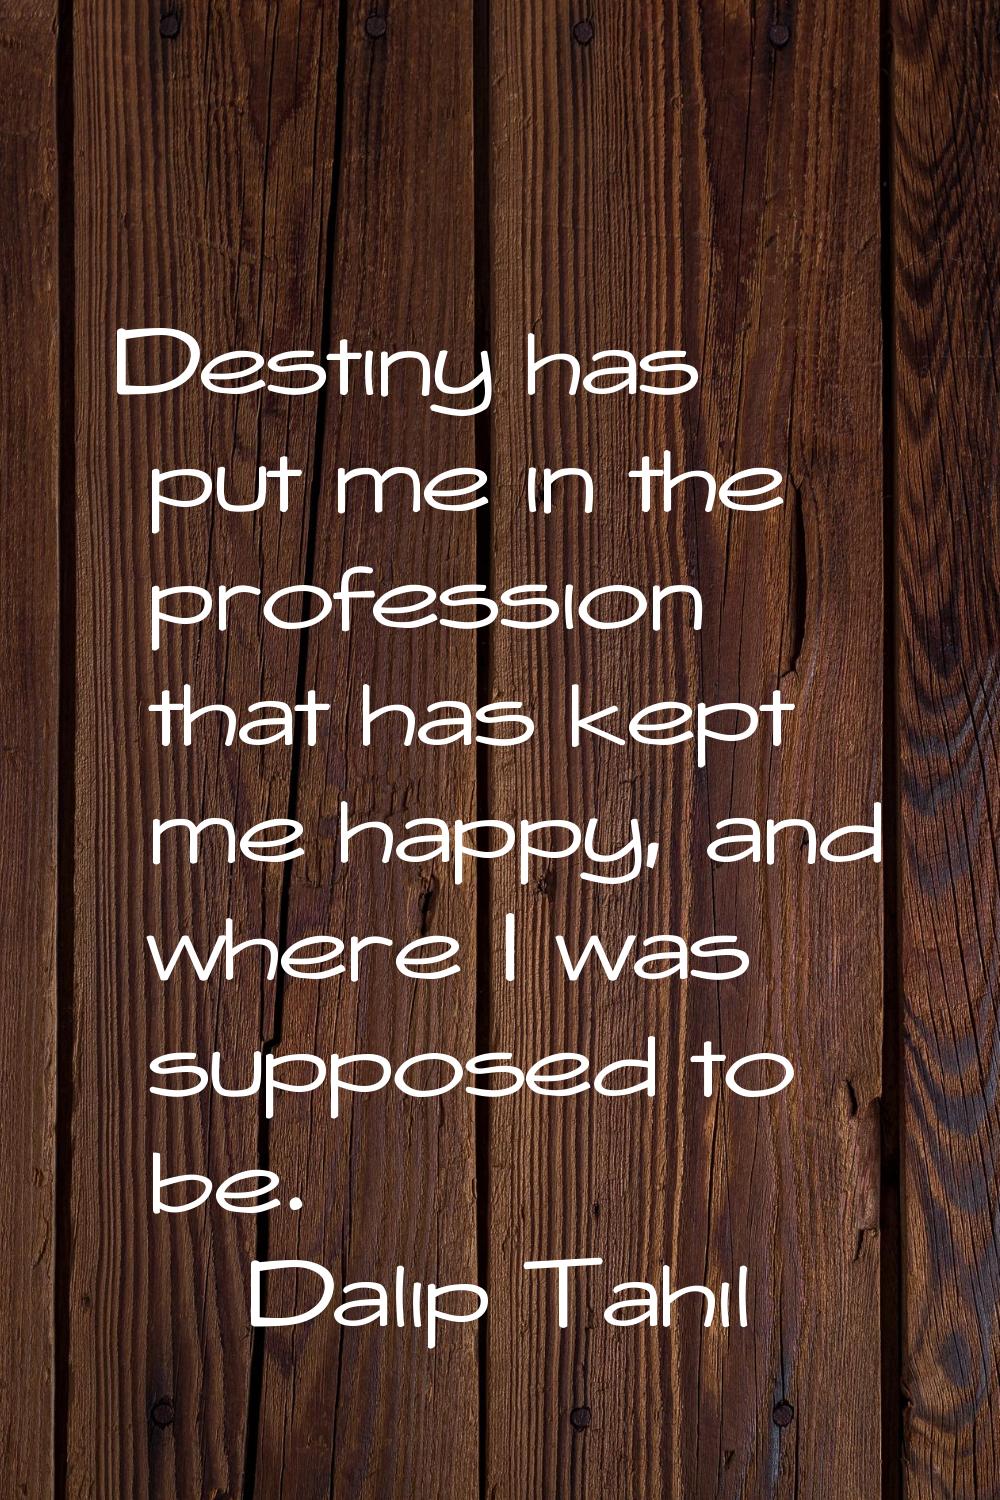 Destiny has put me in the profession that has kept me happy, and where I was supposed to be.